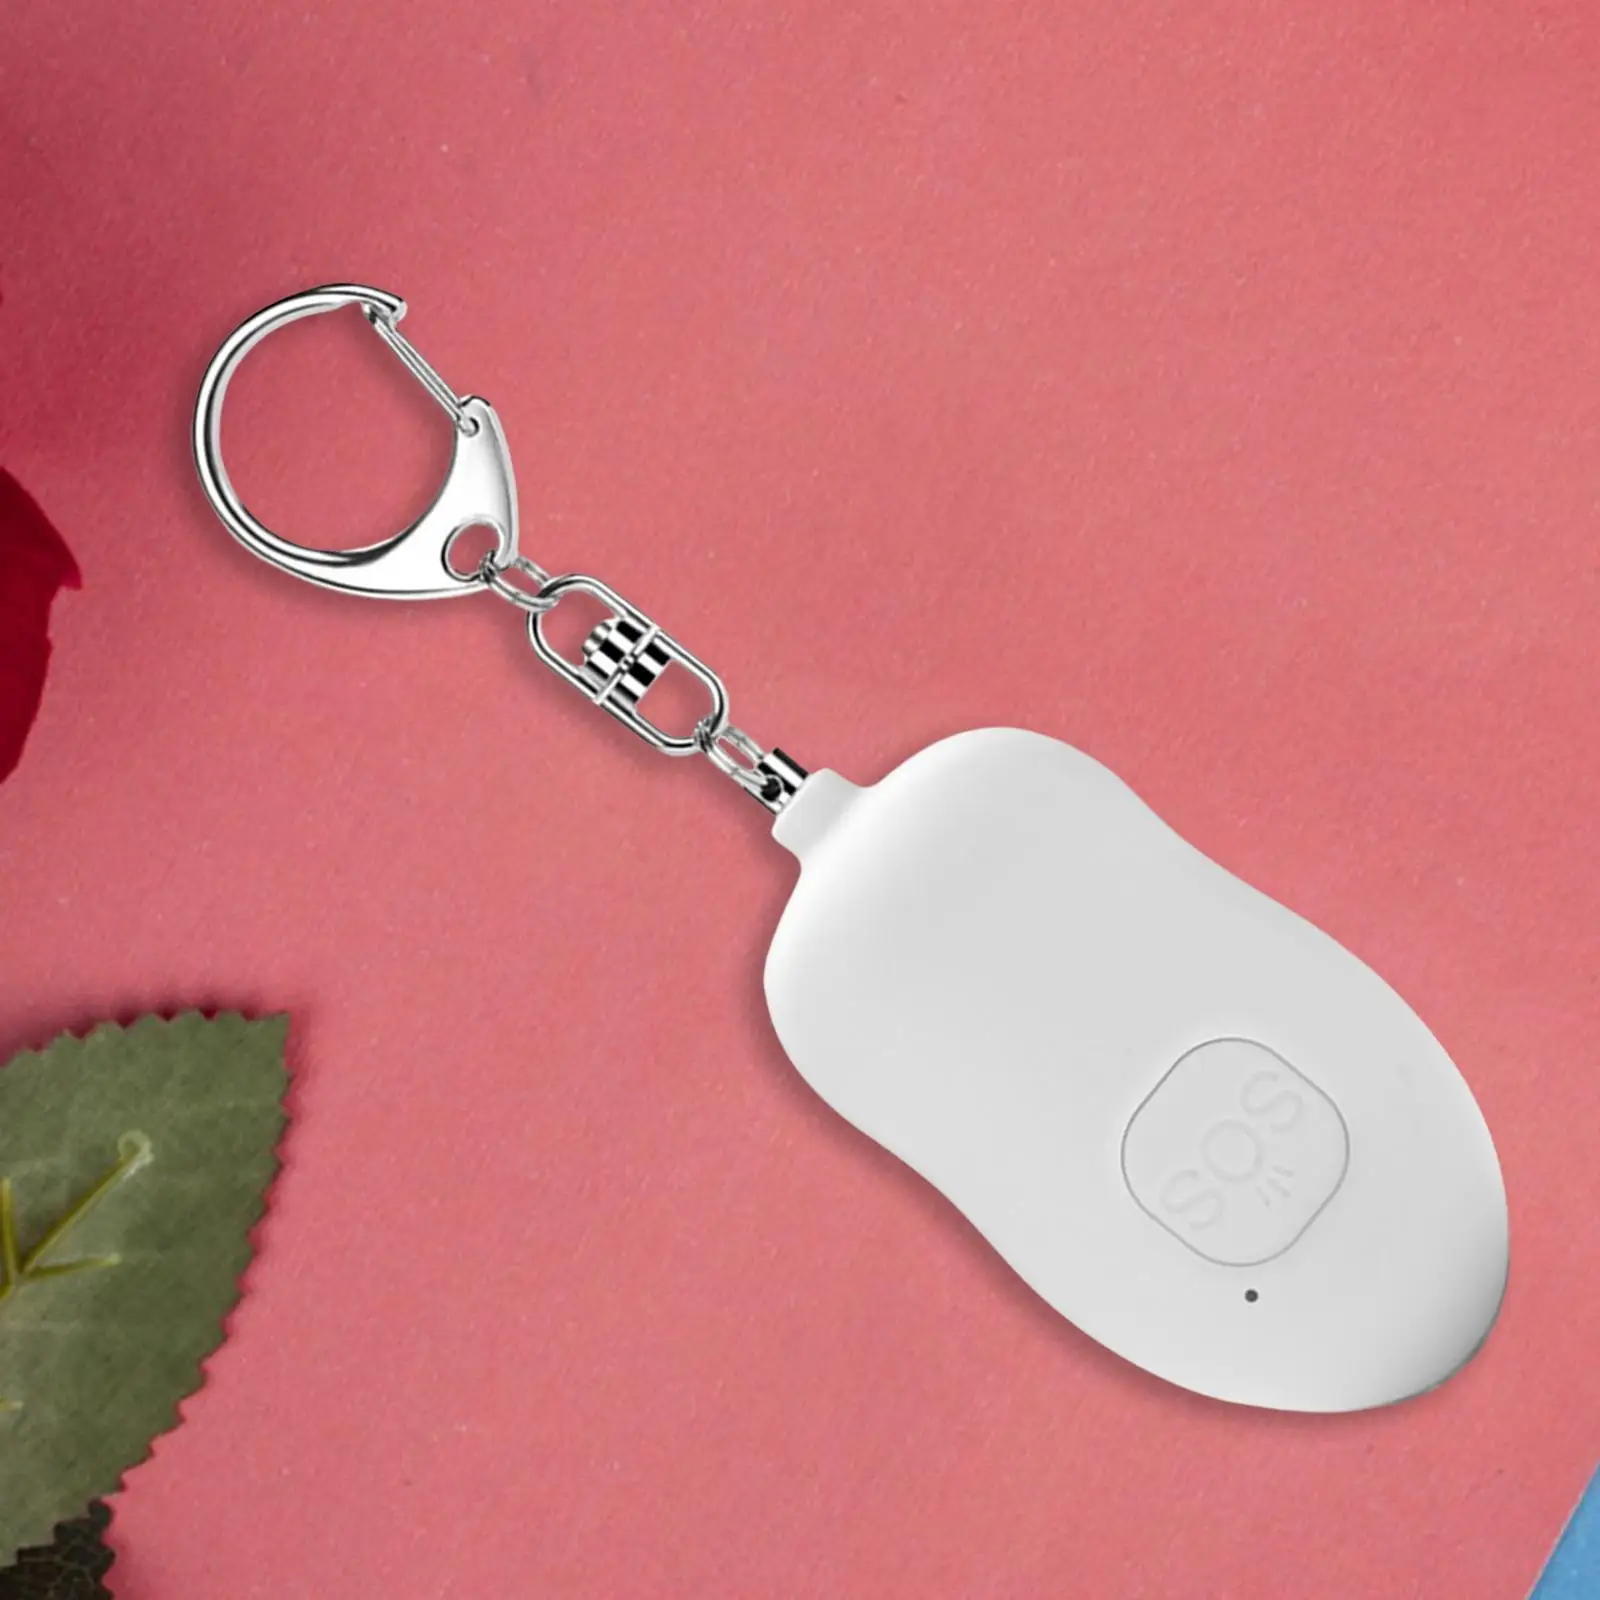 140dB Security Alarm Keychain Personal Alarm for Traveling Women Travelling